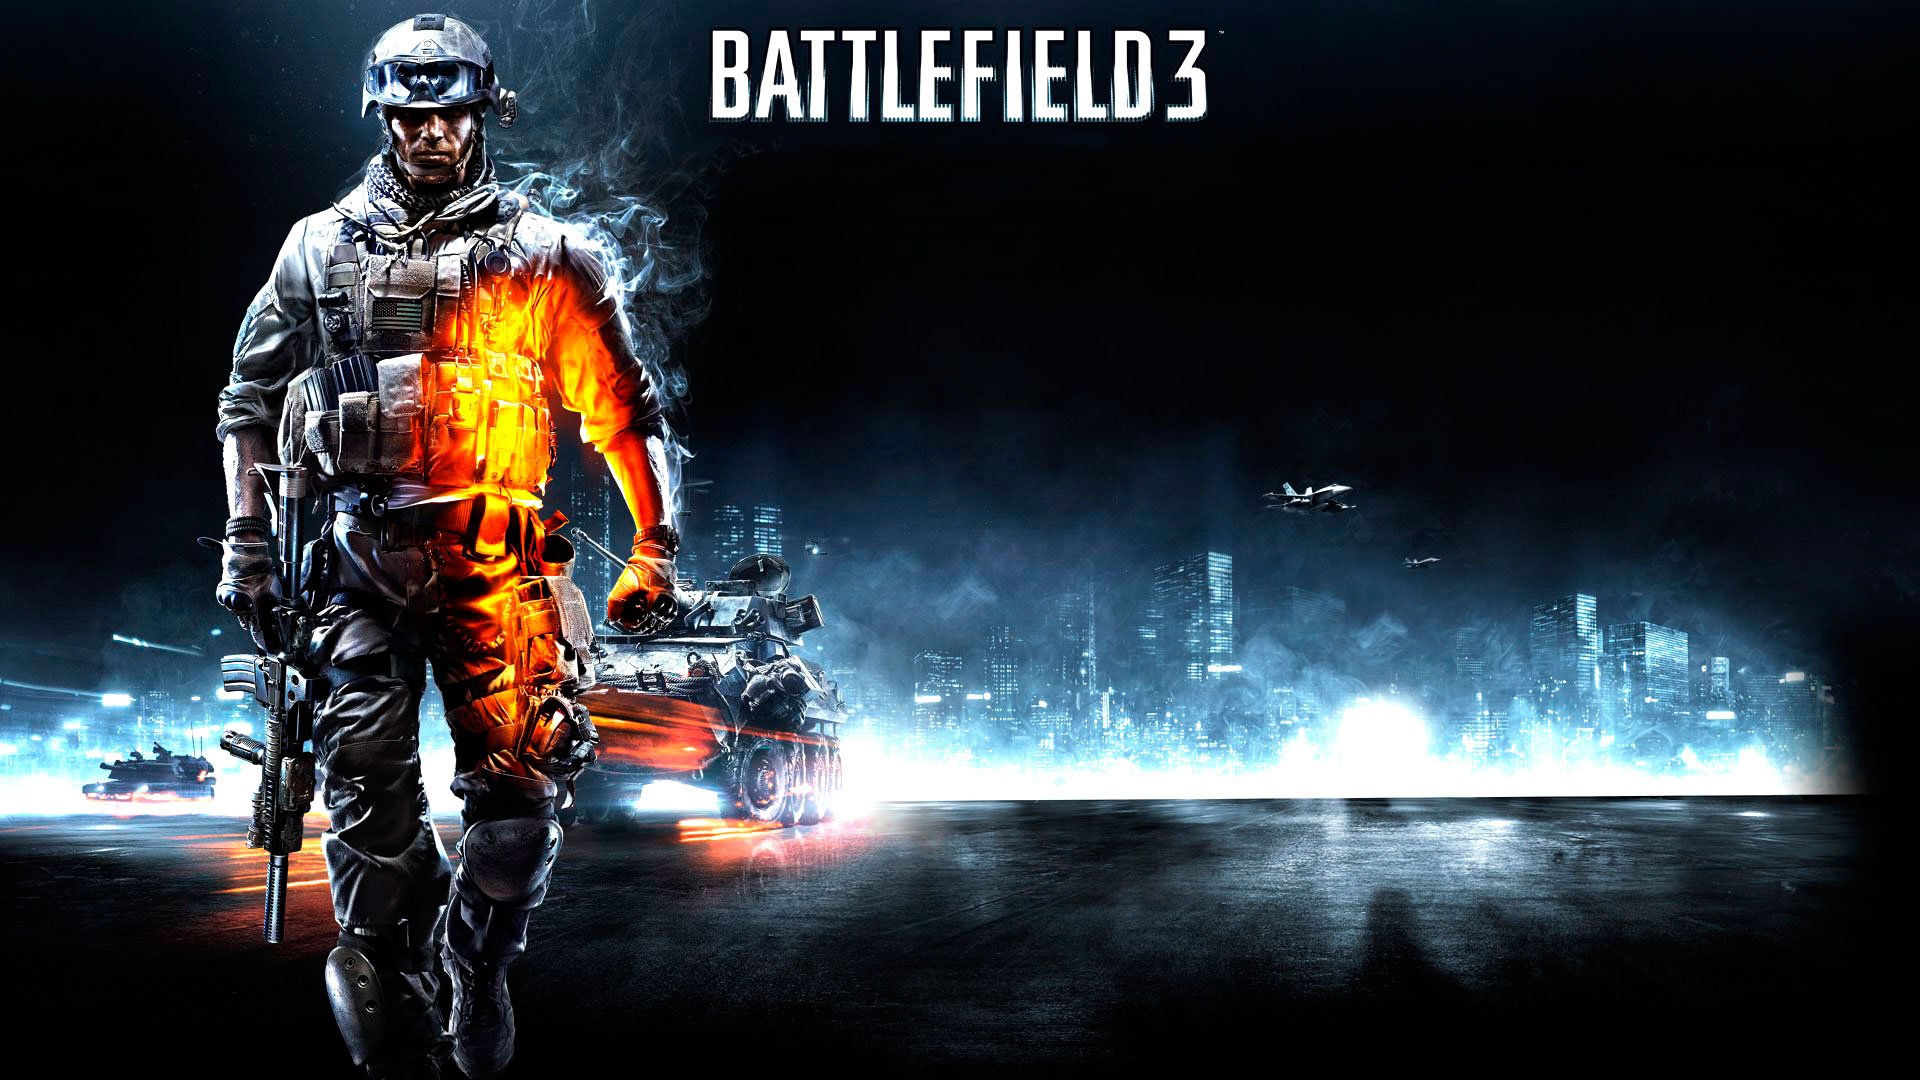 Battlefield Wallpapers in HD High Resolution Page